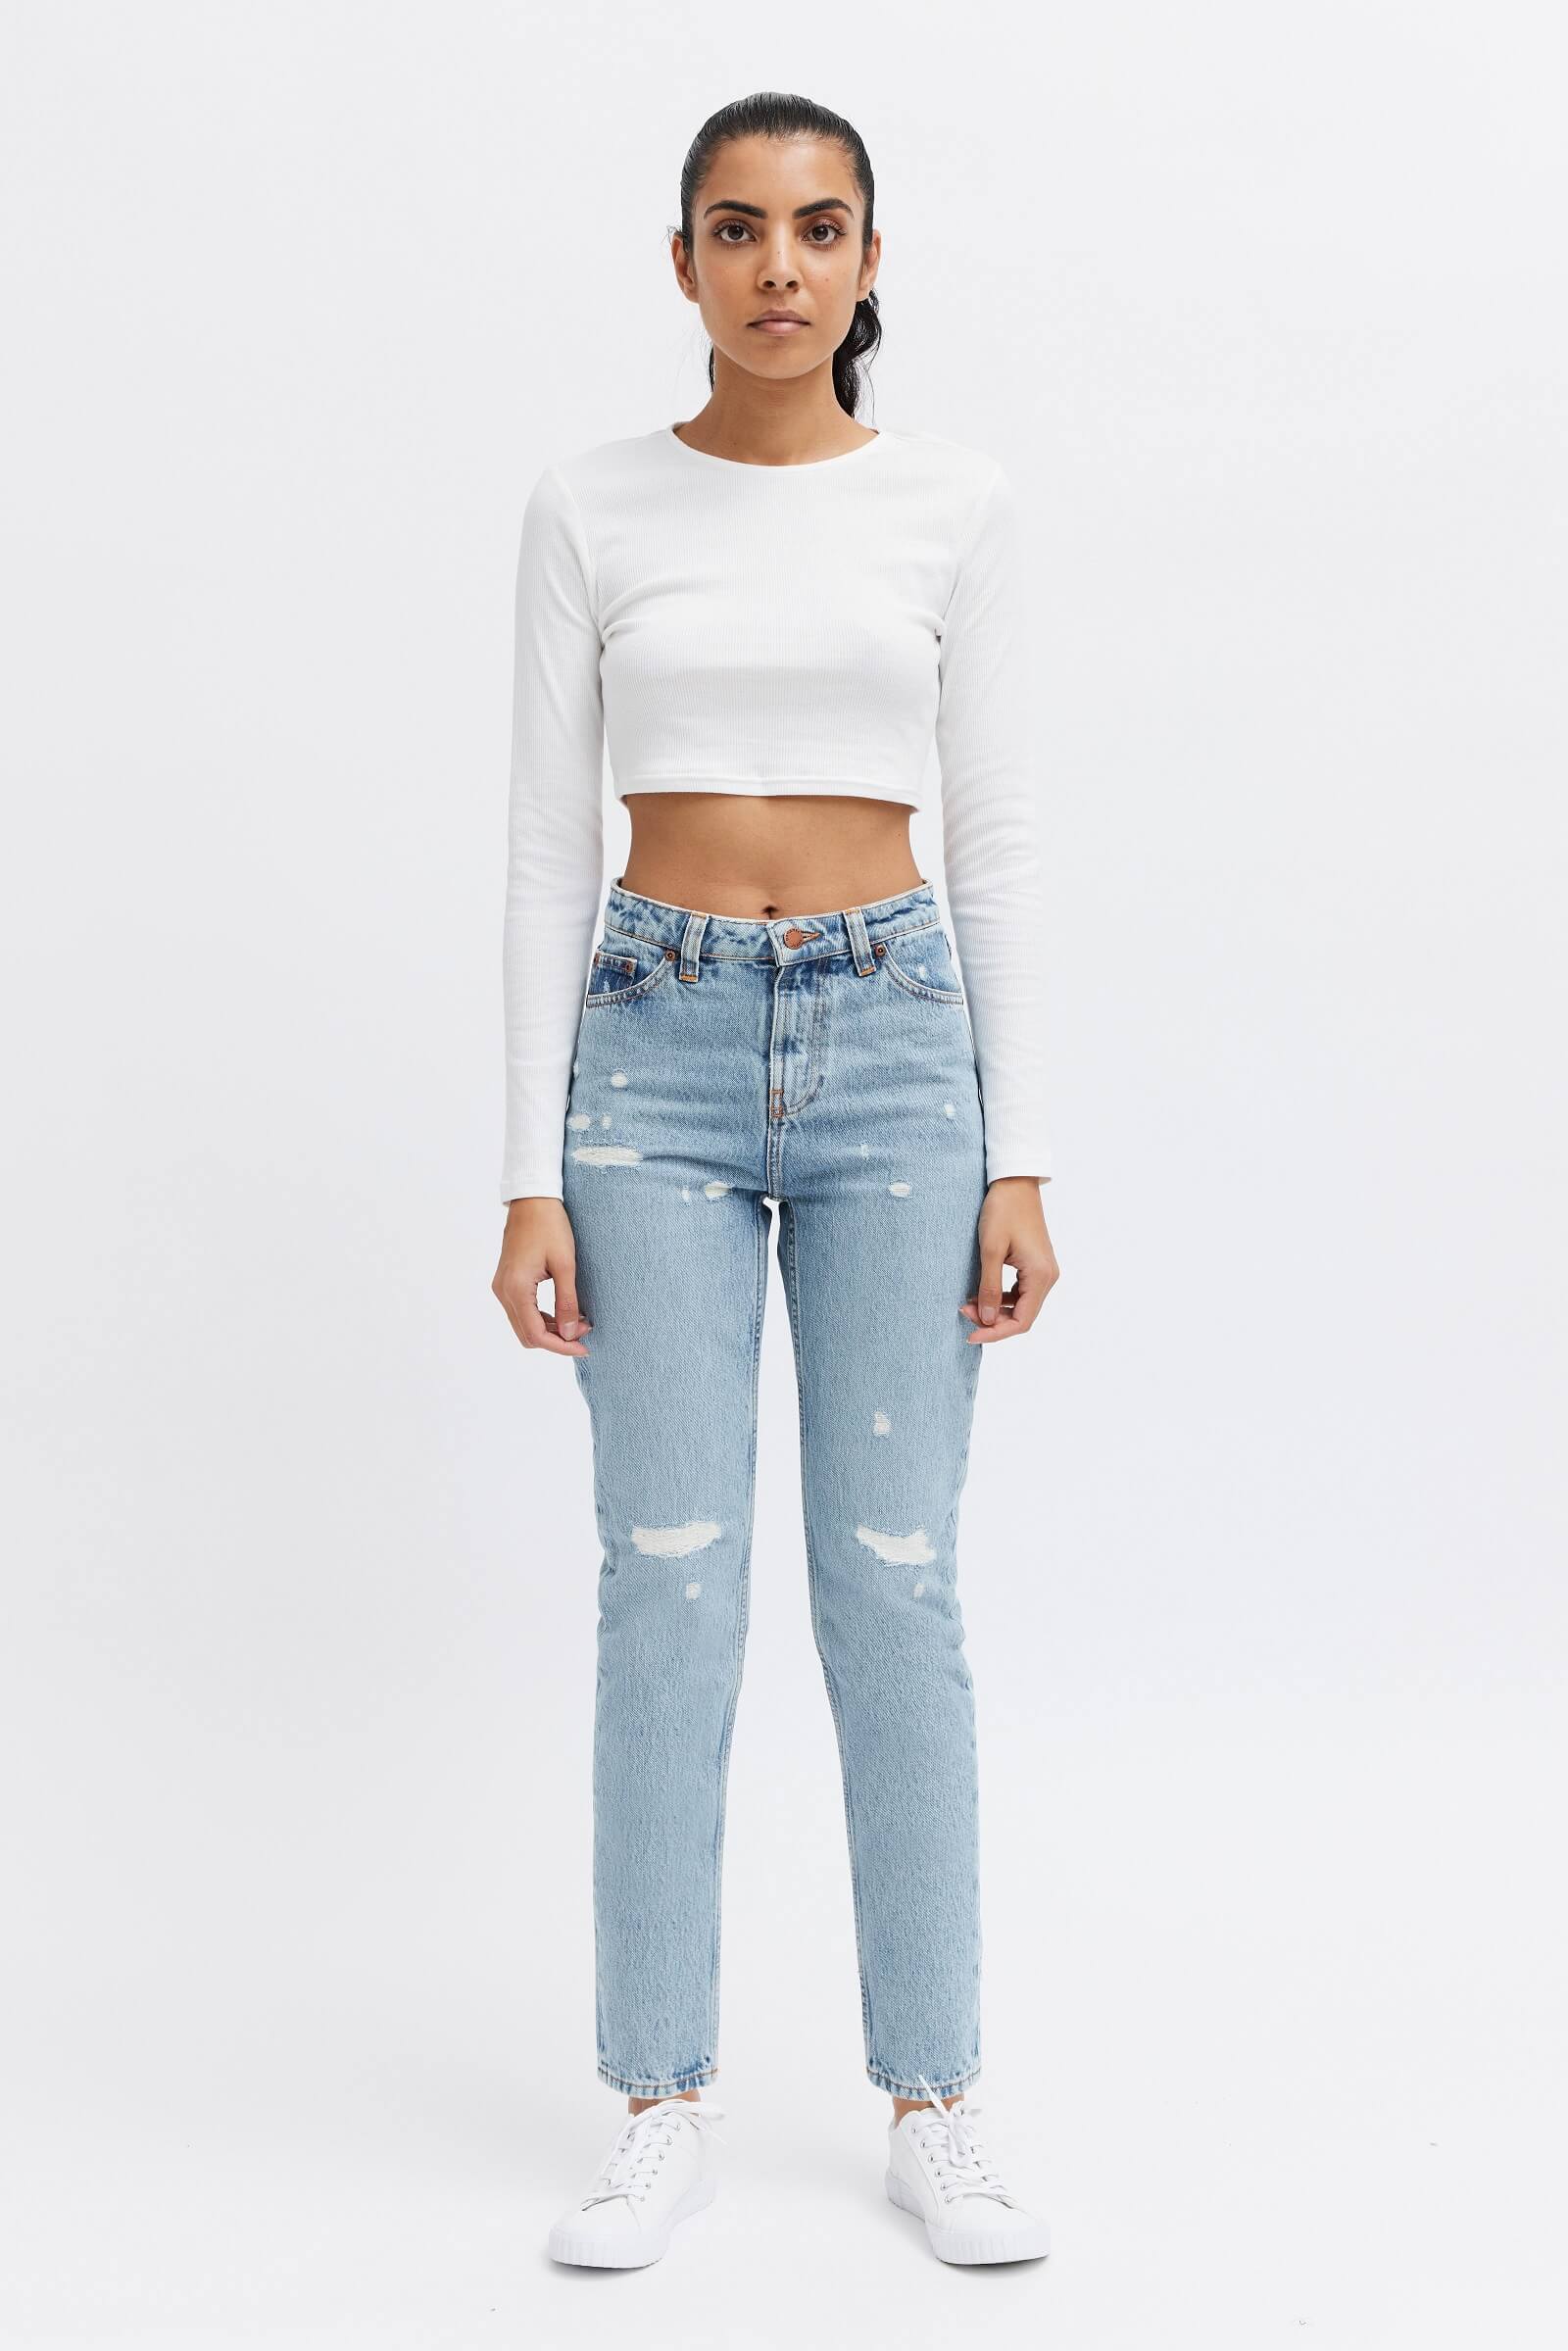 Ripped jeans with distress detail - Organic and Recycled Cotton - Ecolabel